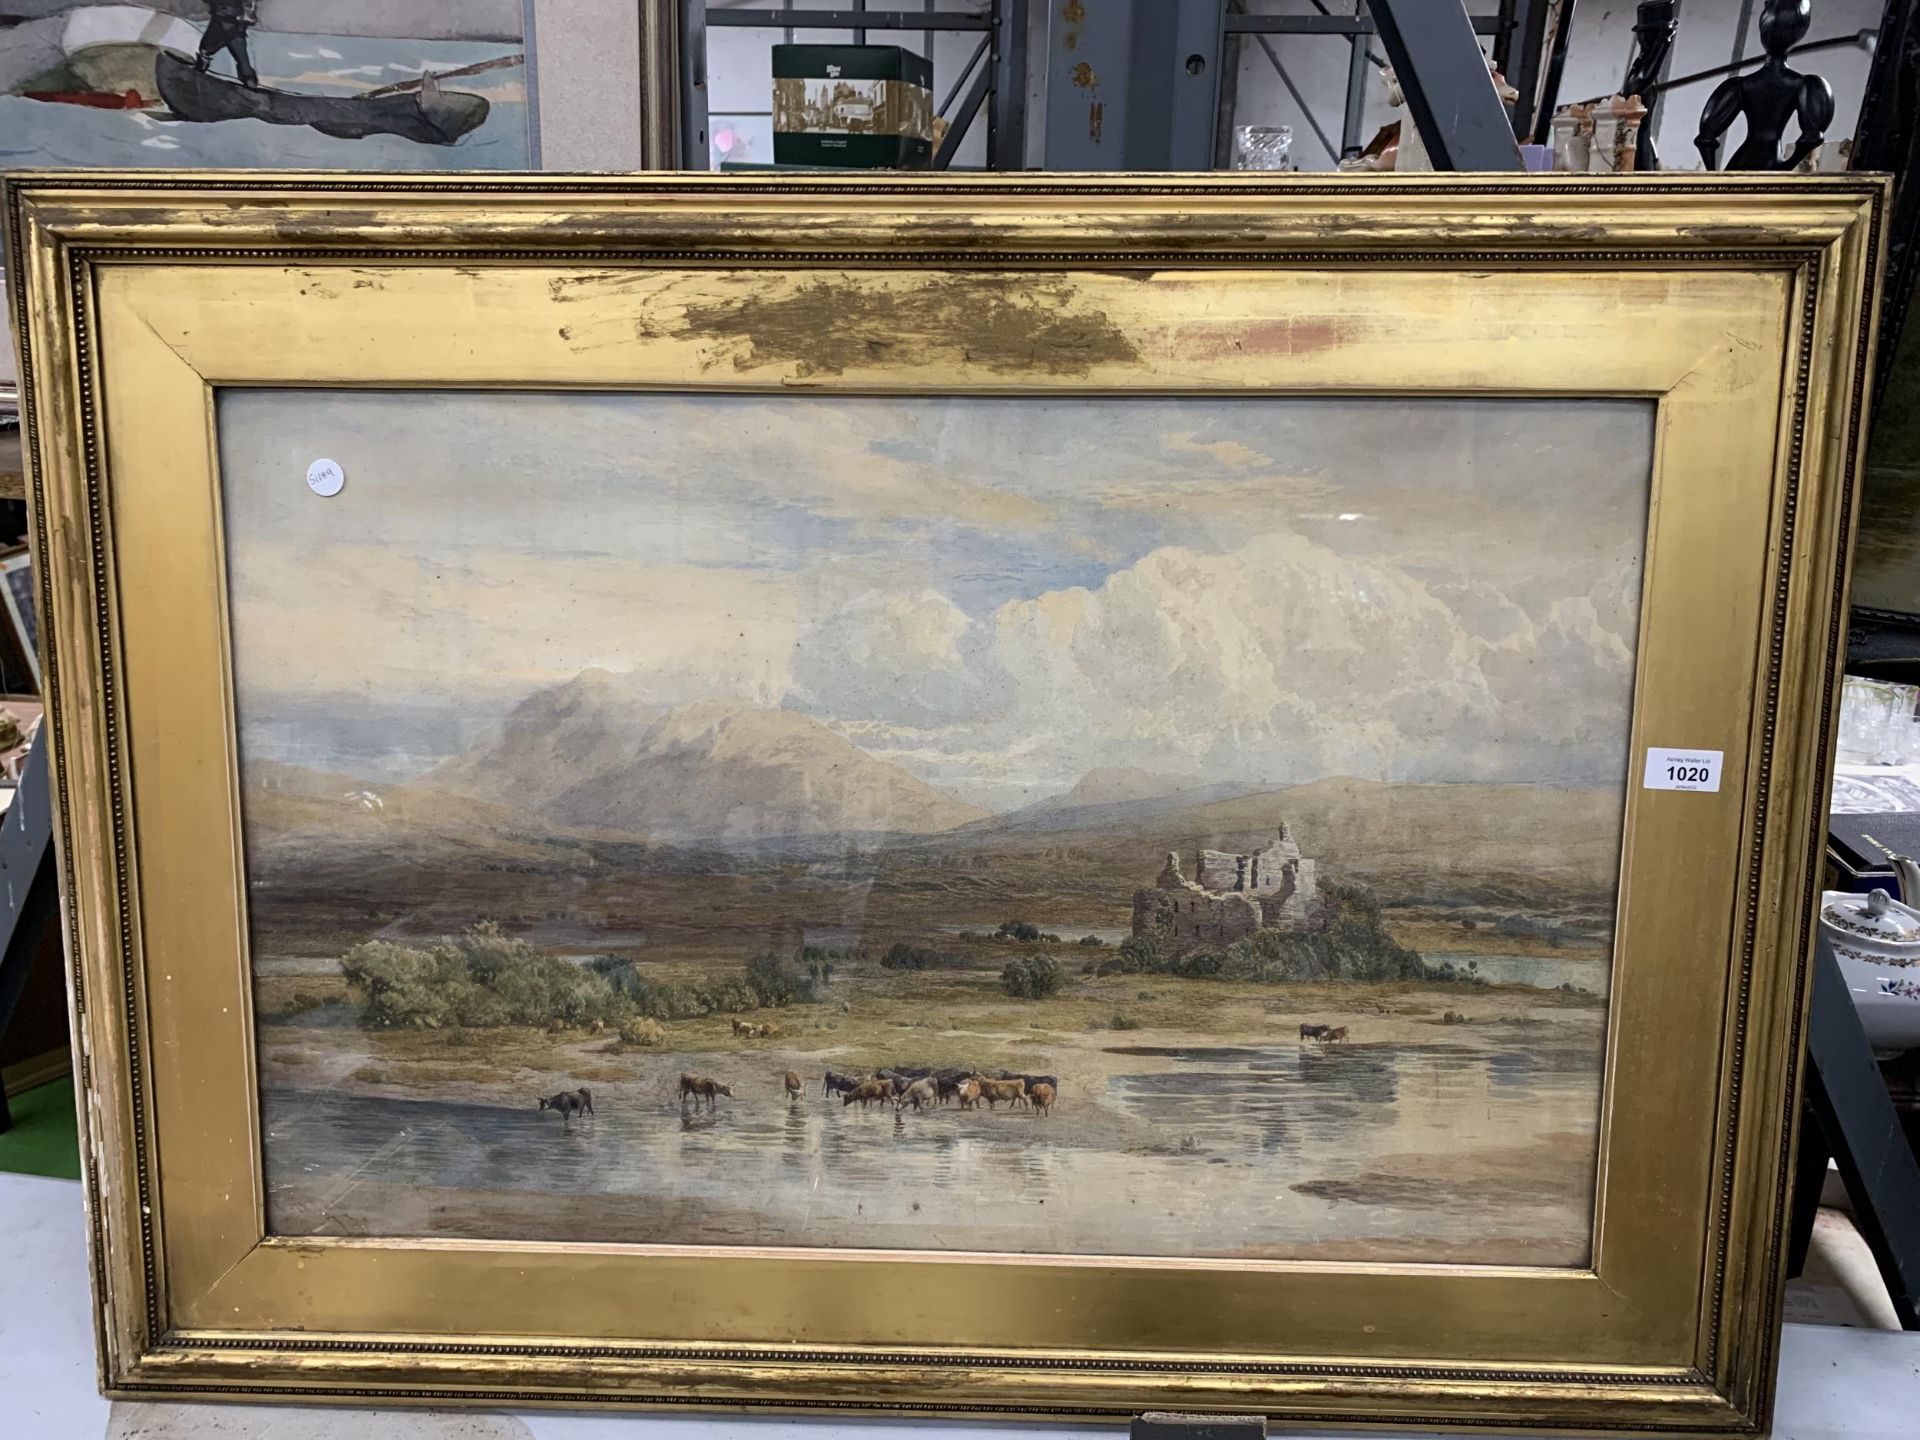 A LARGE WATERCOLOUR IN GILT FRAME OF THE SCOTTISH HIGHLANDS - 93 X 68 CM APPROX